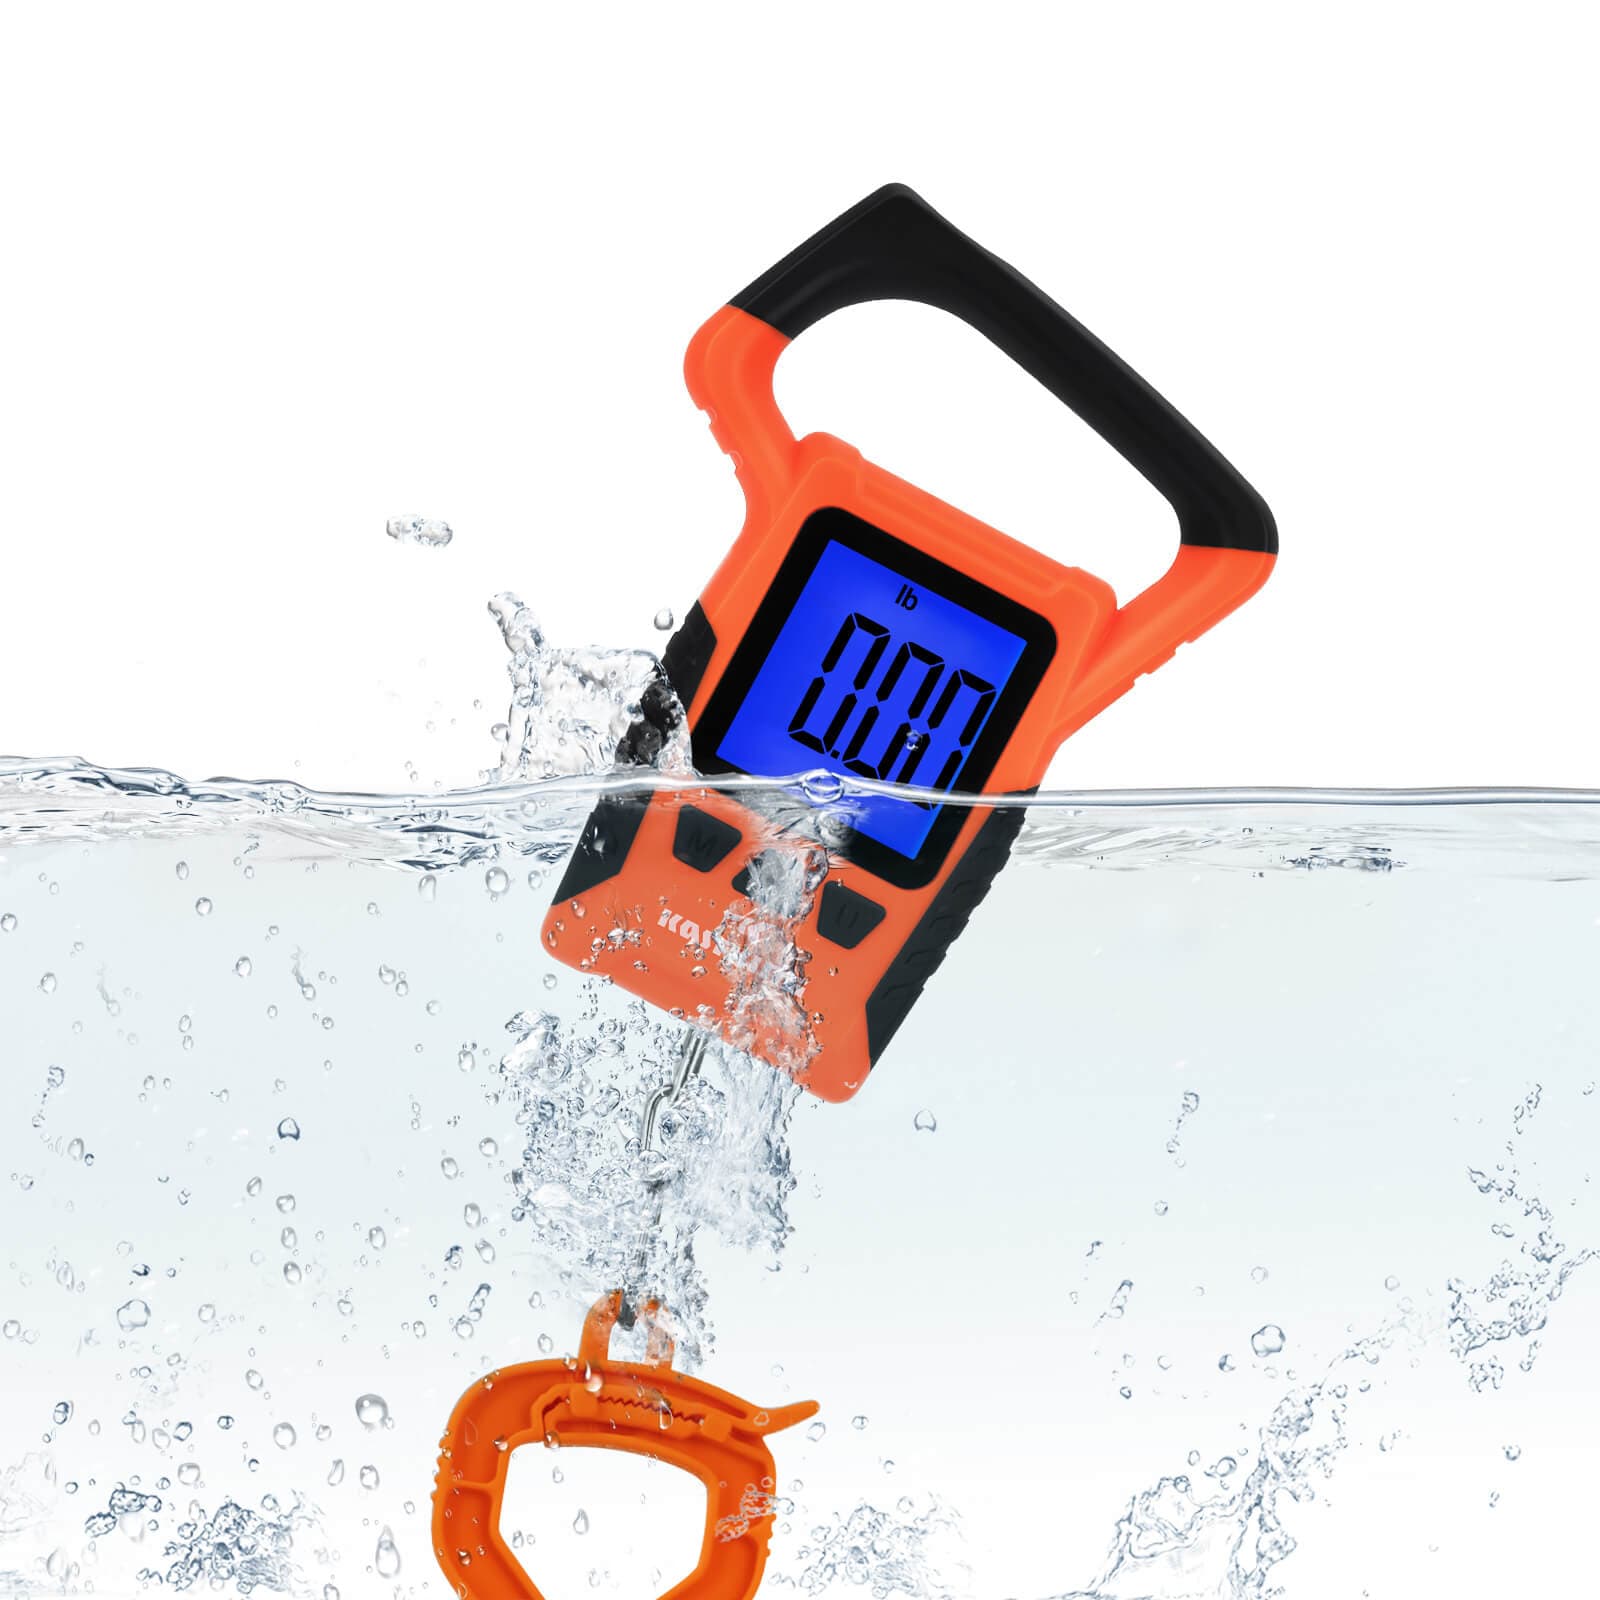 Waterproof Floating Digital Fishing Scale With No-puncture Lip